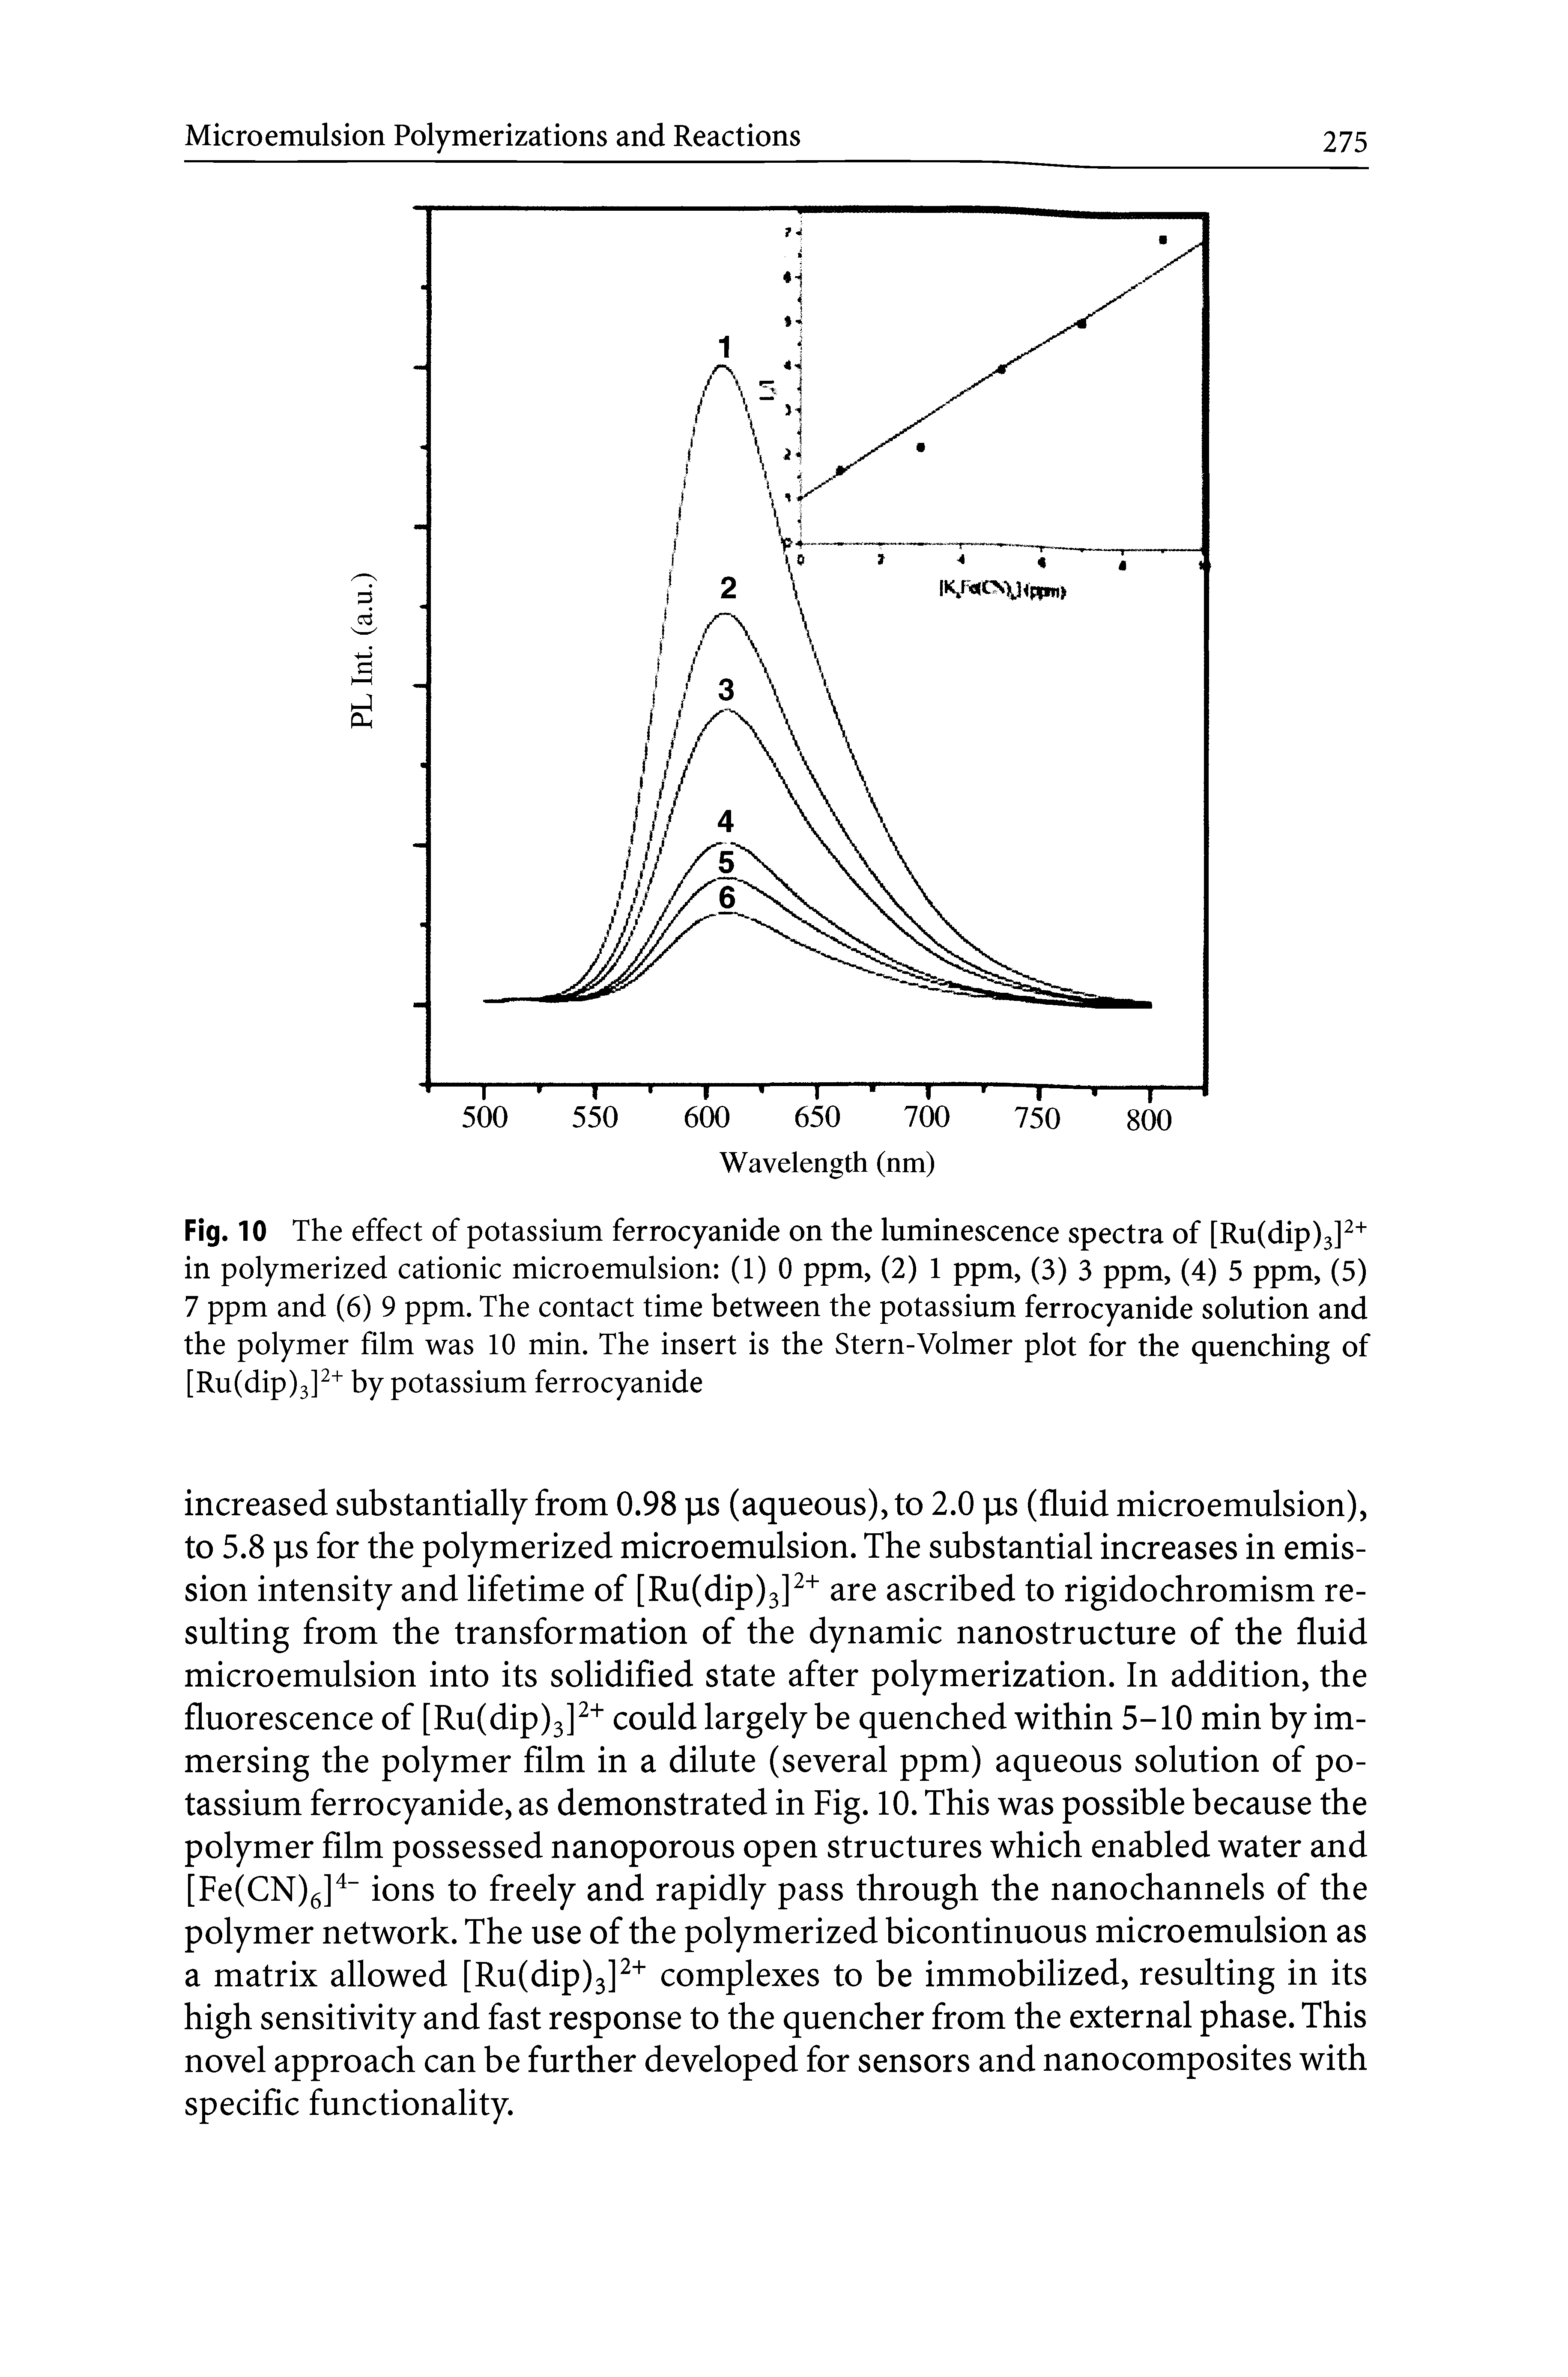 Fig. 10 The effect of potassium ferrocyanide on the luminescence spectra of [Ru(dip)3] in polymerized cationic micro emulsion (1)0 ppm, (2) 1 ppm, (3) 3 ppm, (4) 5 ppm, (5) 7 ppm and (6) 9 ppm. The contact time between the potassium ferrocyanide solution and the polymer film was 10 min. The insert is the Stern-Volmer plot for the quenching of [Ru(dip)3] + by potassium ferrocyanide...